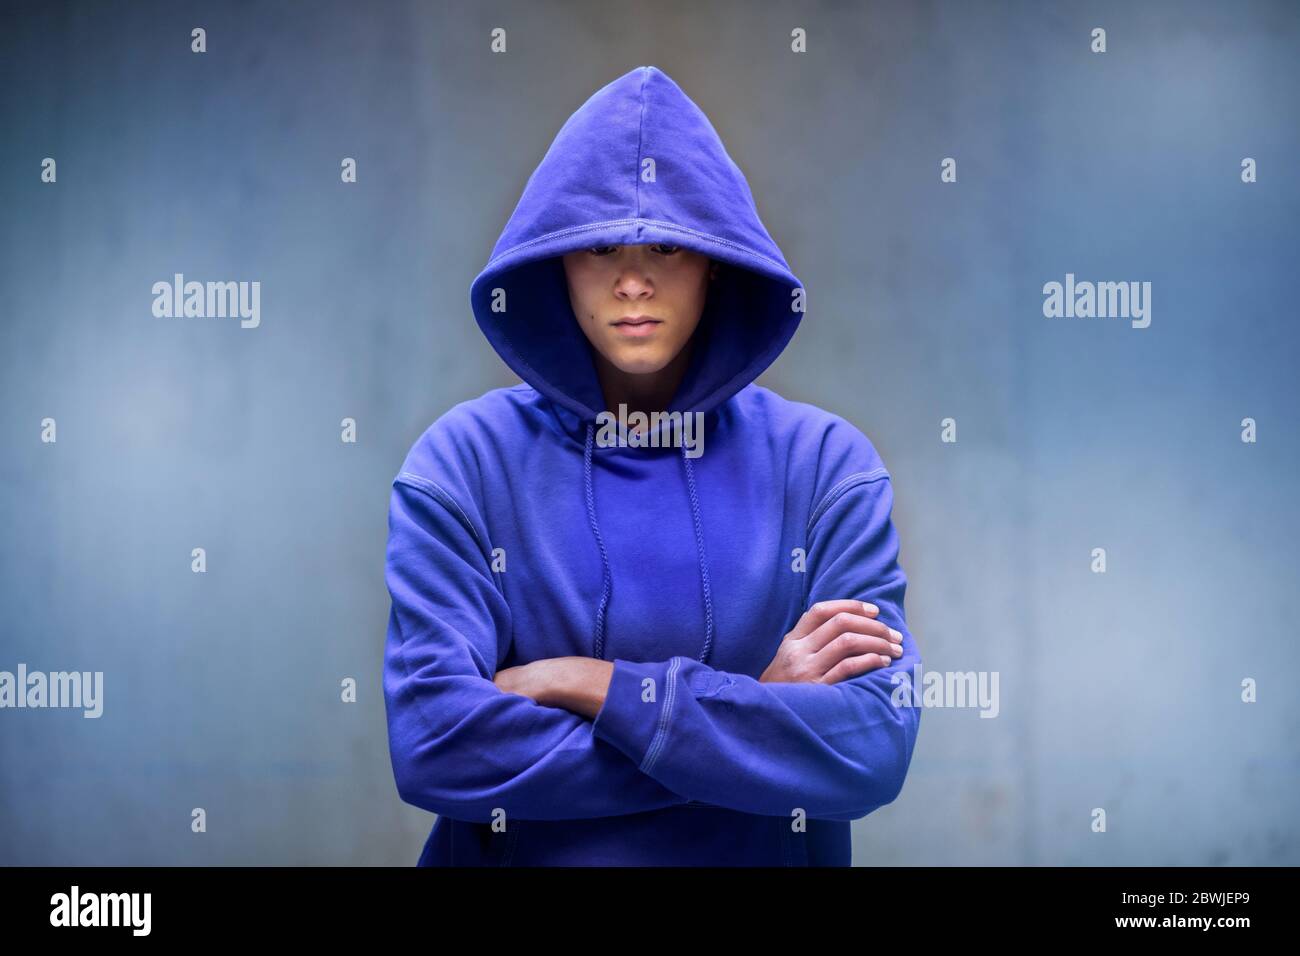 Young man in blue top with hood pulled low over his eyes standing with folded arms facing the camera against a grey wall with copy space Stock Photo